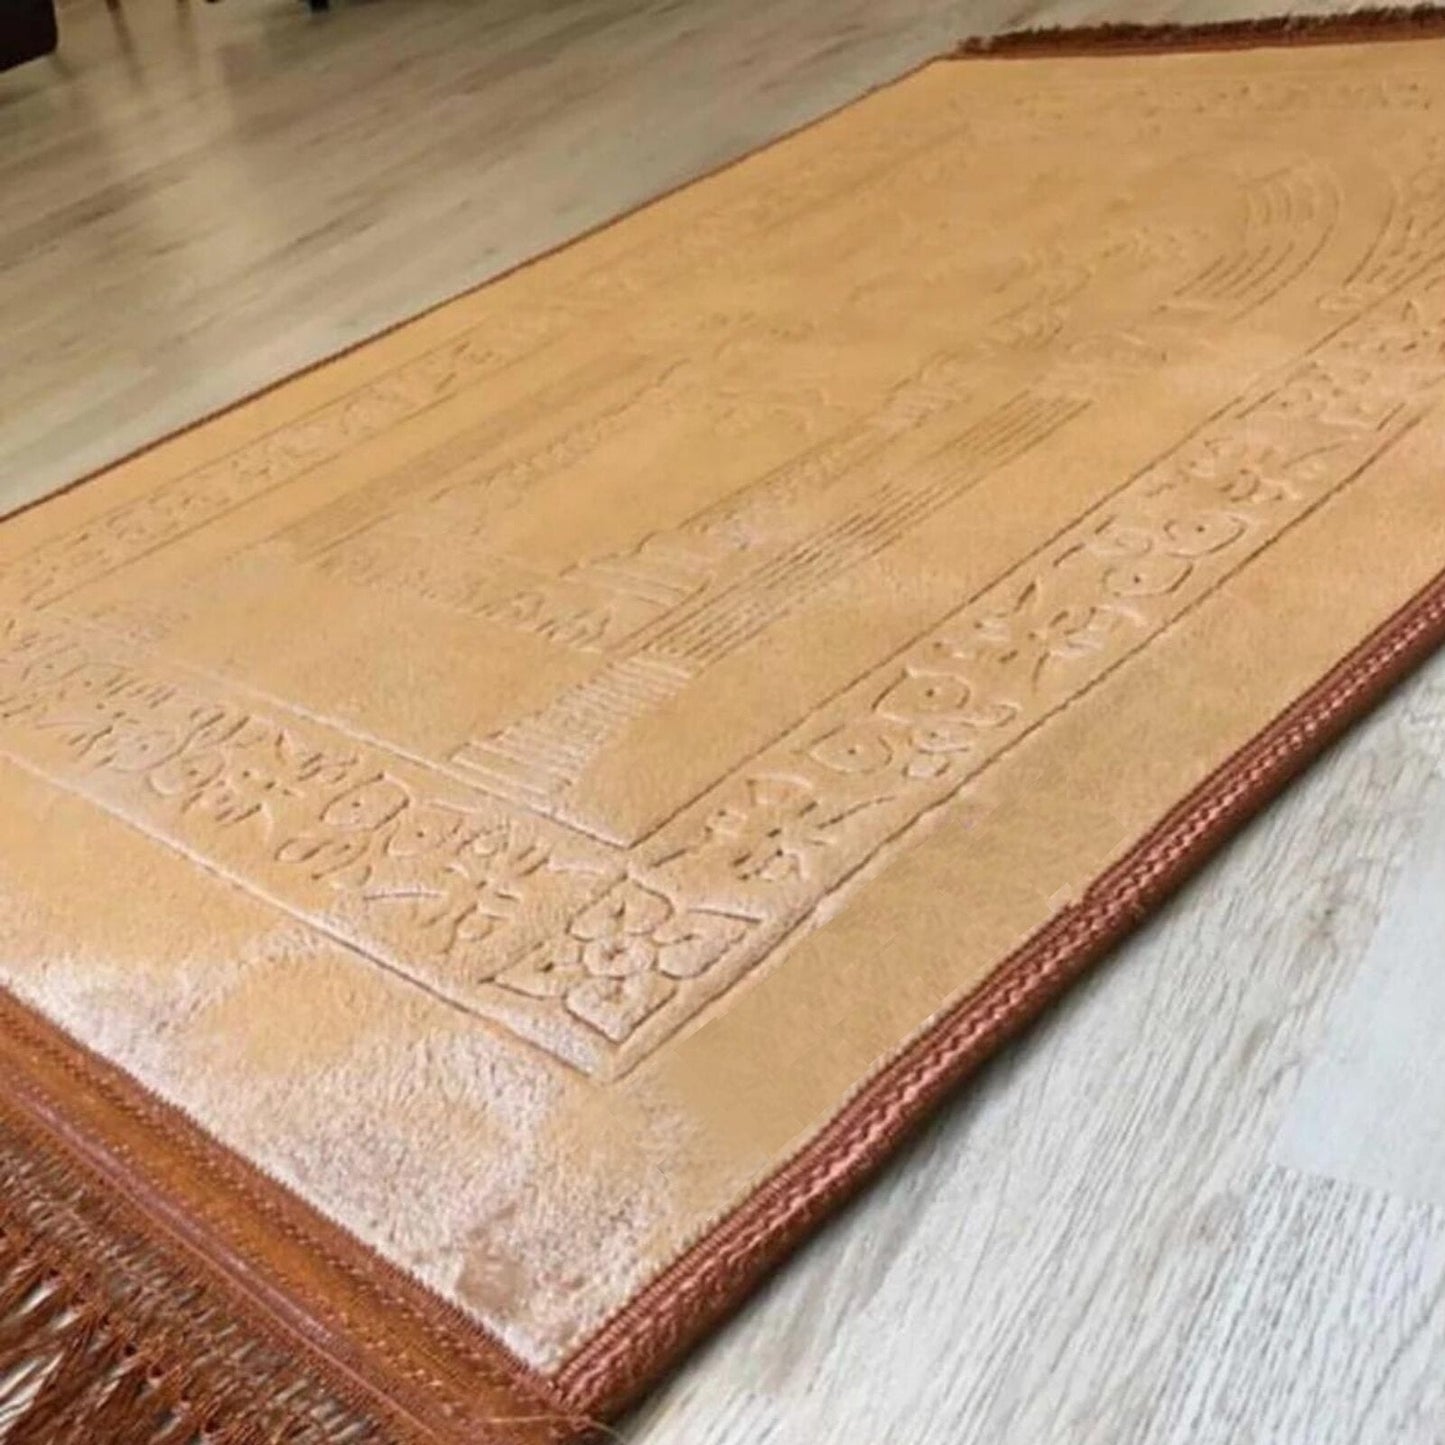 Customized Hand Woven Prayer Rug: Premium Thick Islamic Prayer Mat - Perfect for Ramadan, Eid, Weddings, and Special Muslim Occasions